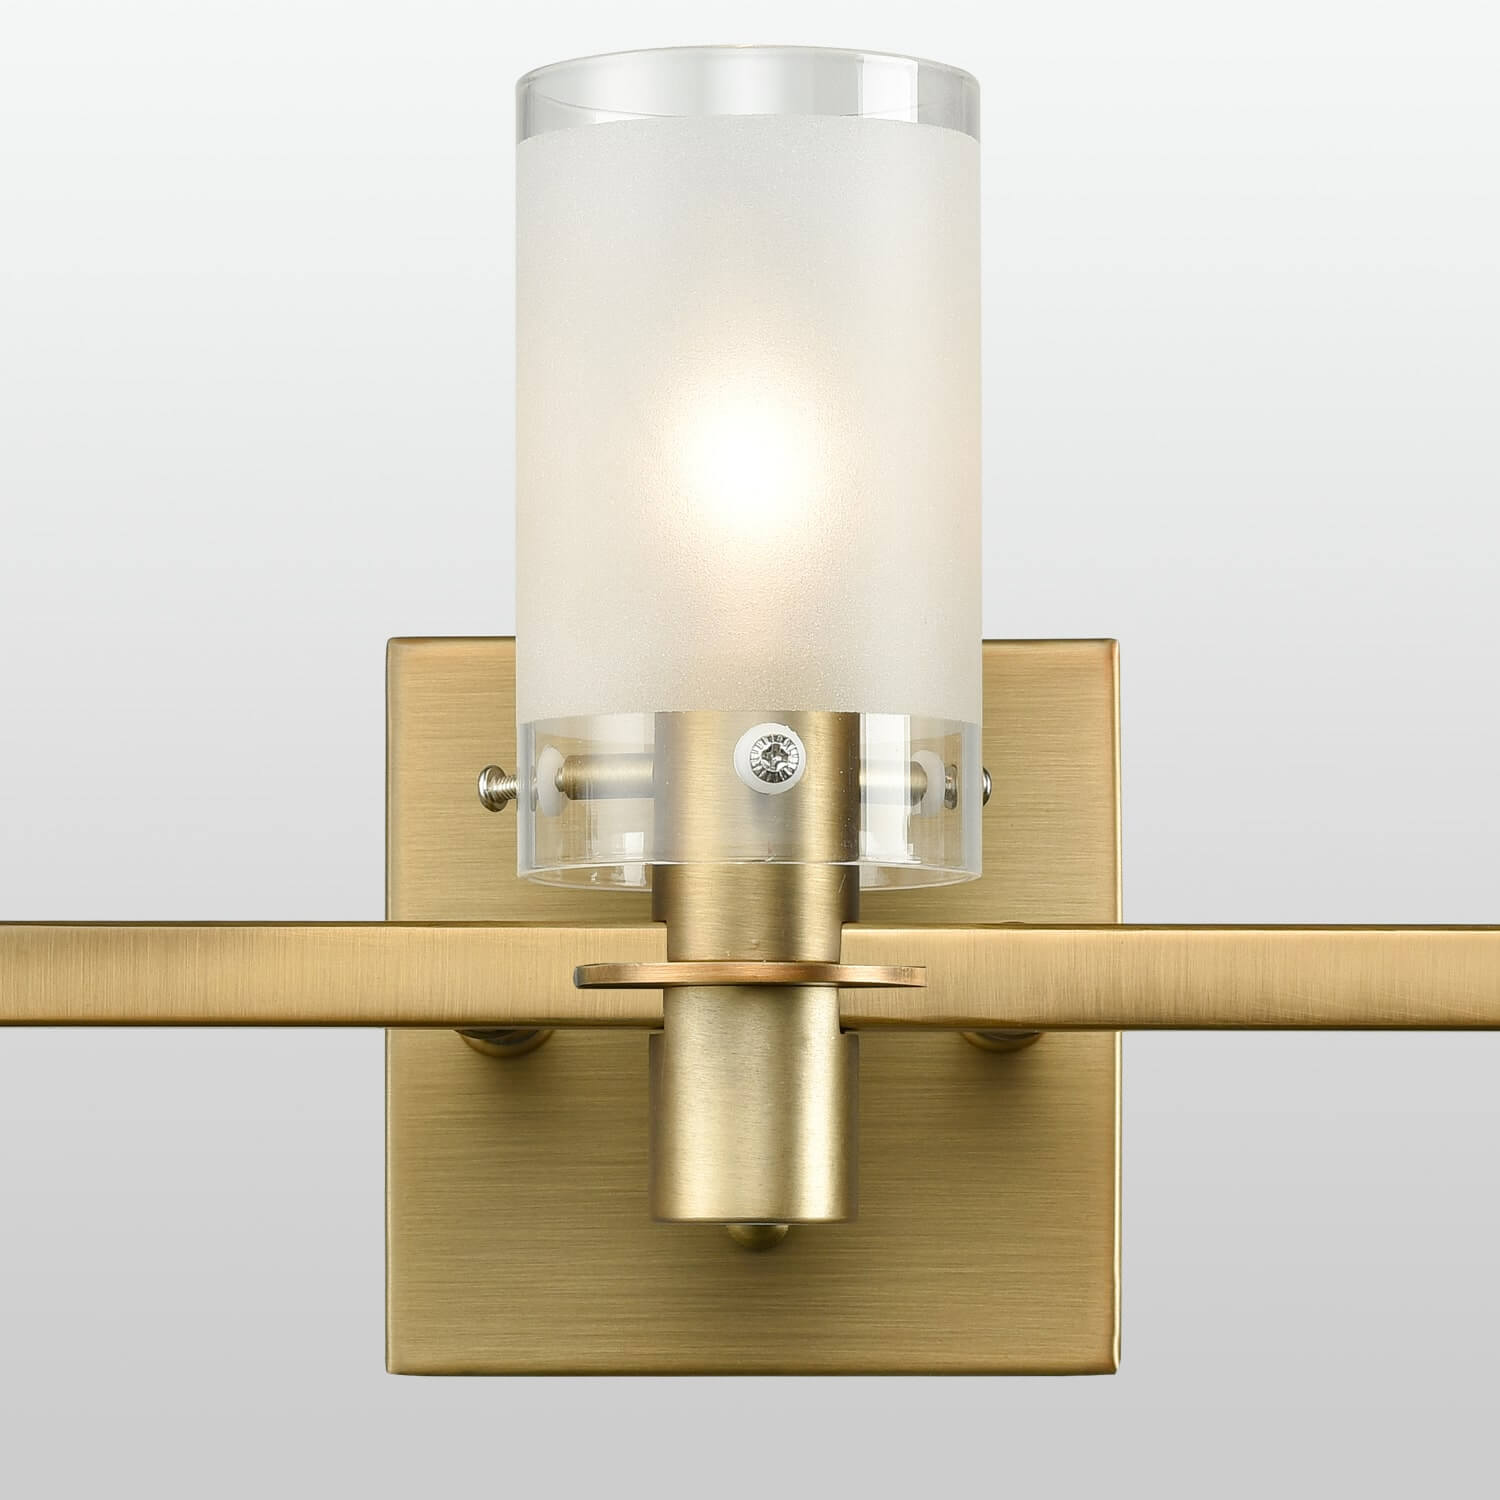 Modern Brass Bathroom Vanity Lighting with Frosted Glass - 3 Light